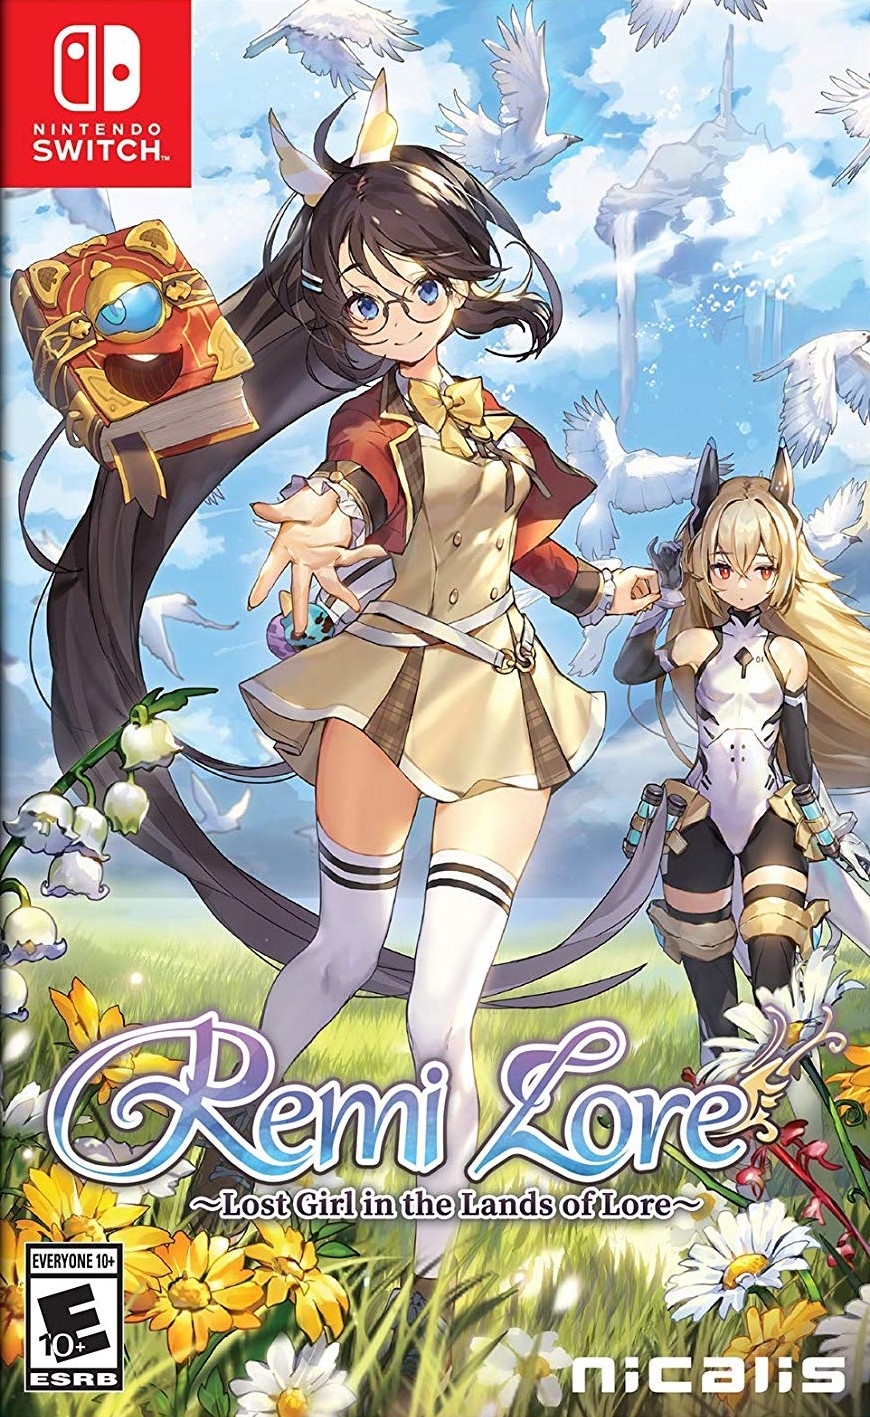 RemiLore: Lost Girl in the Lands of Lore, Nicalis, Nintendo Switch, 852961008034 - image 1 of 1